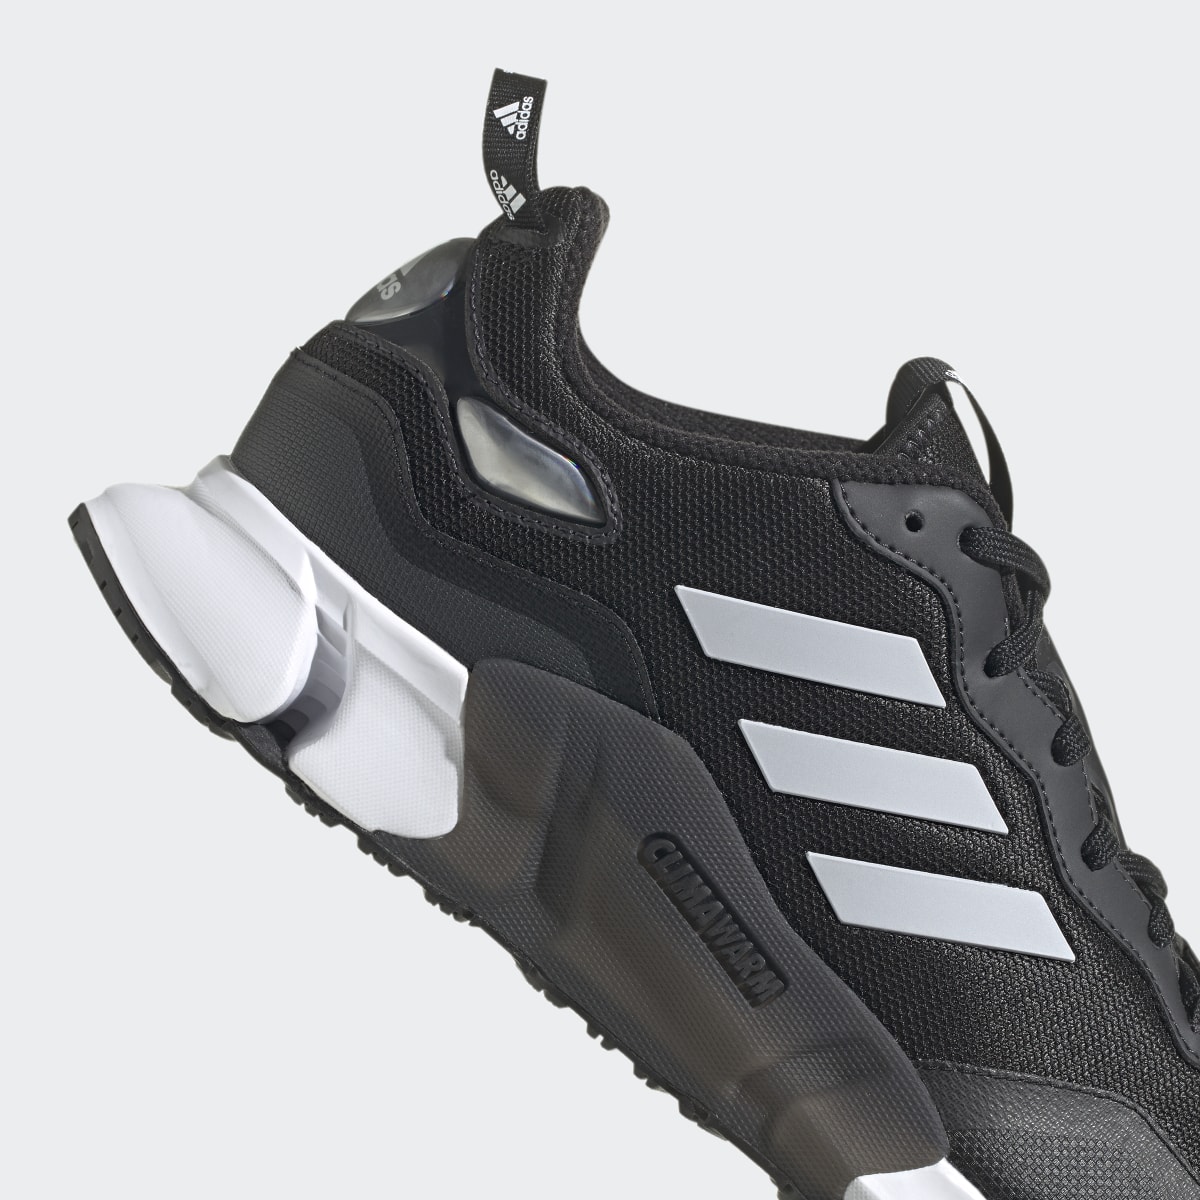 Adidas Climawarm Shoes. 4